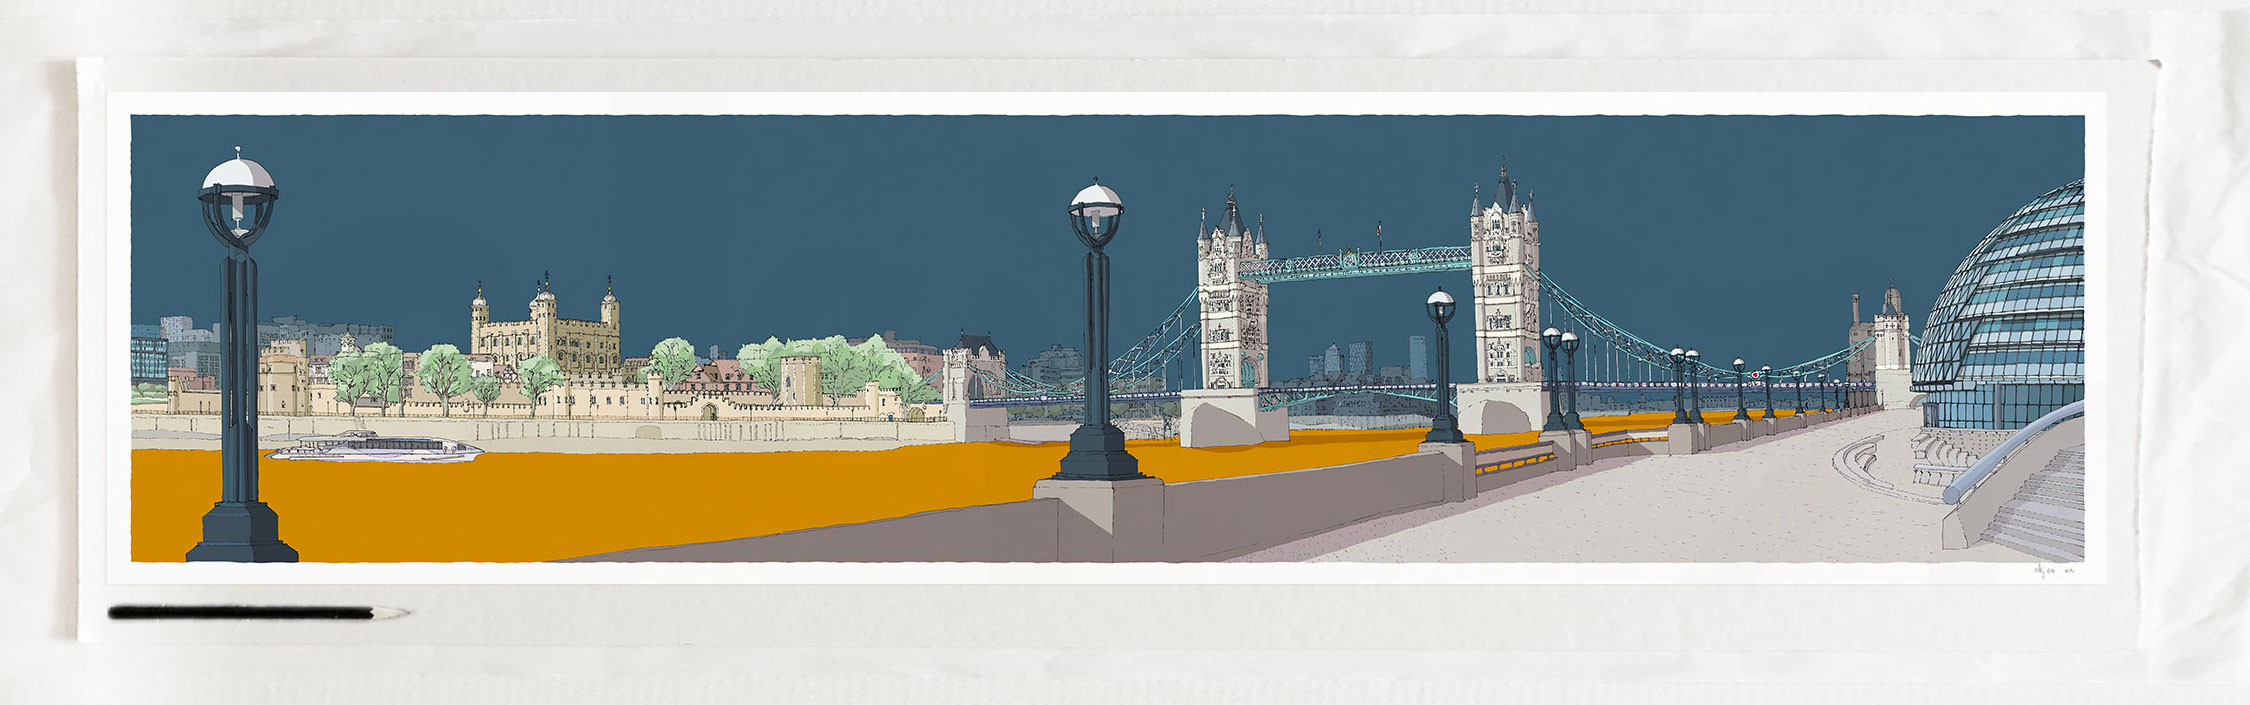 art print titled London River Thames by Tower Bridge Antique Blue and Ochre by artist alej ez